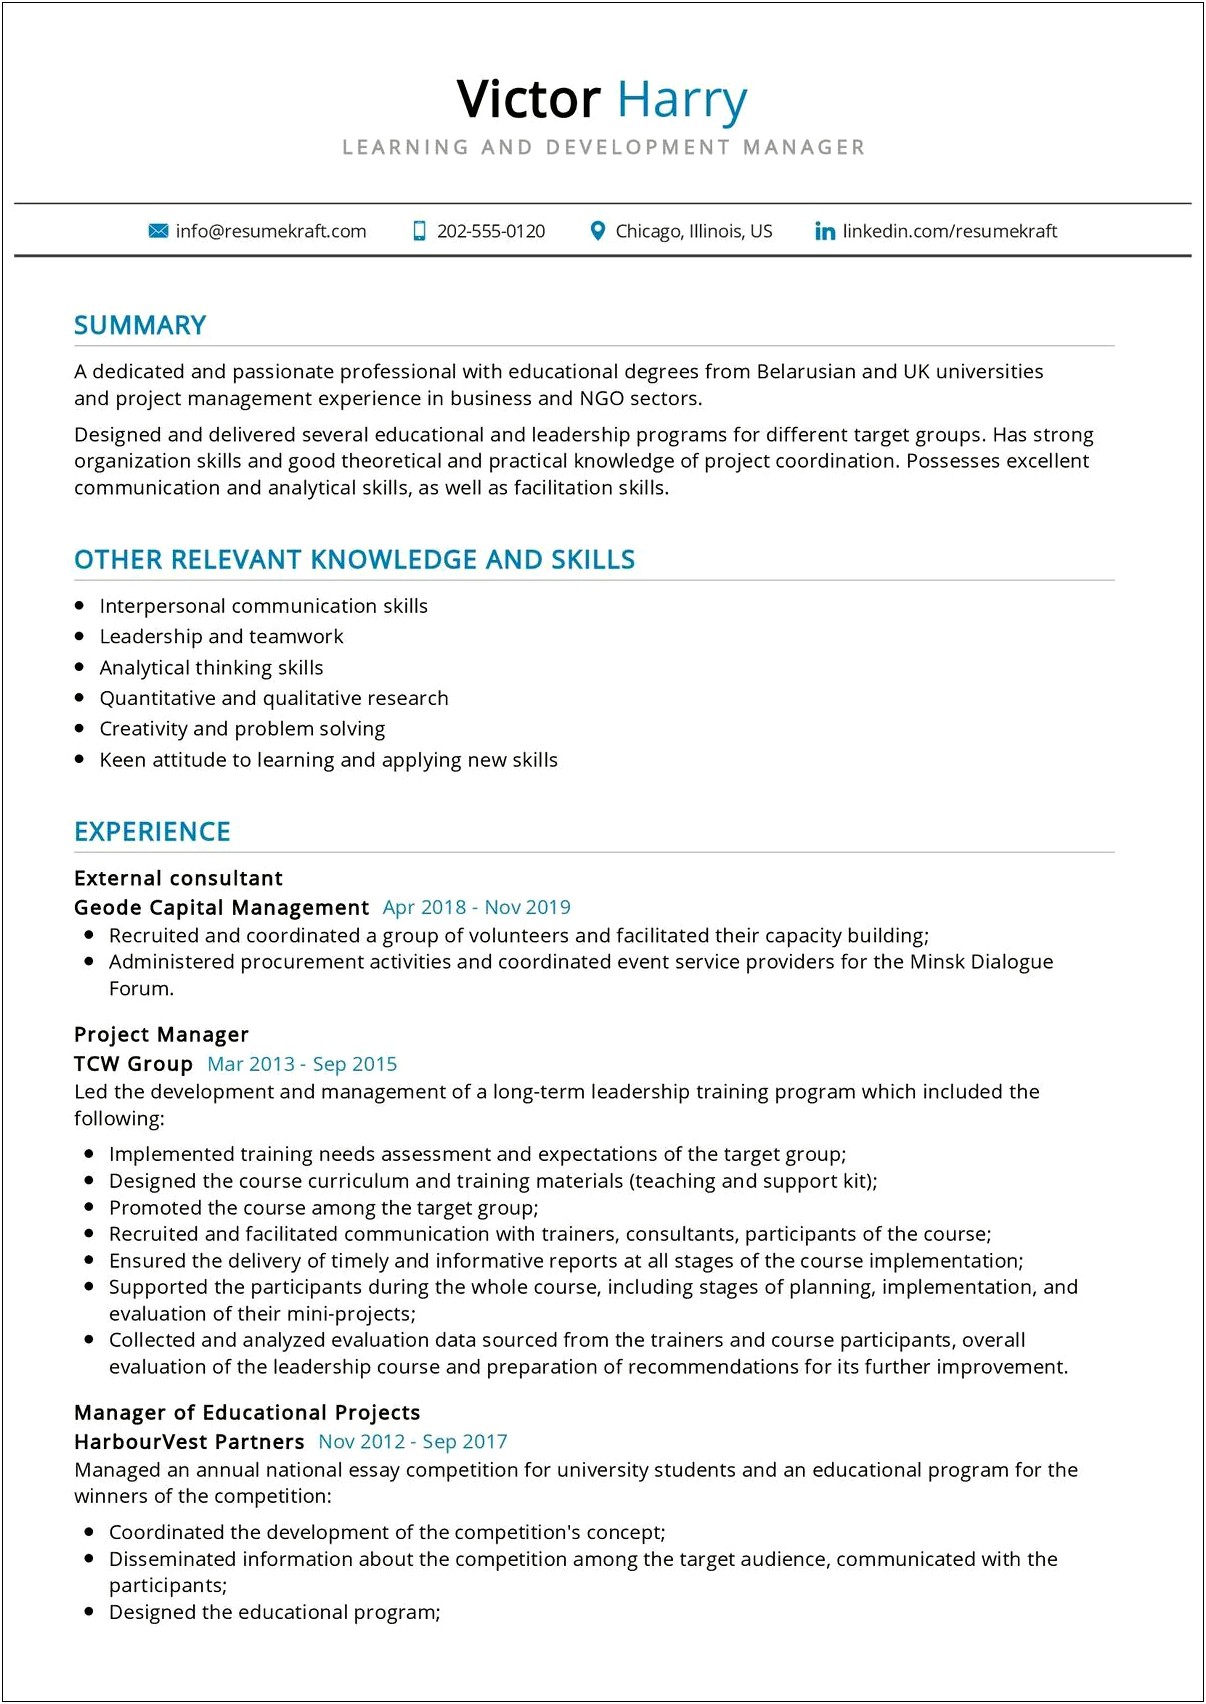 Application Development And Manager And Resume